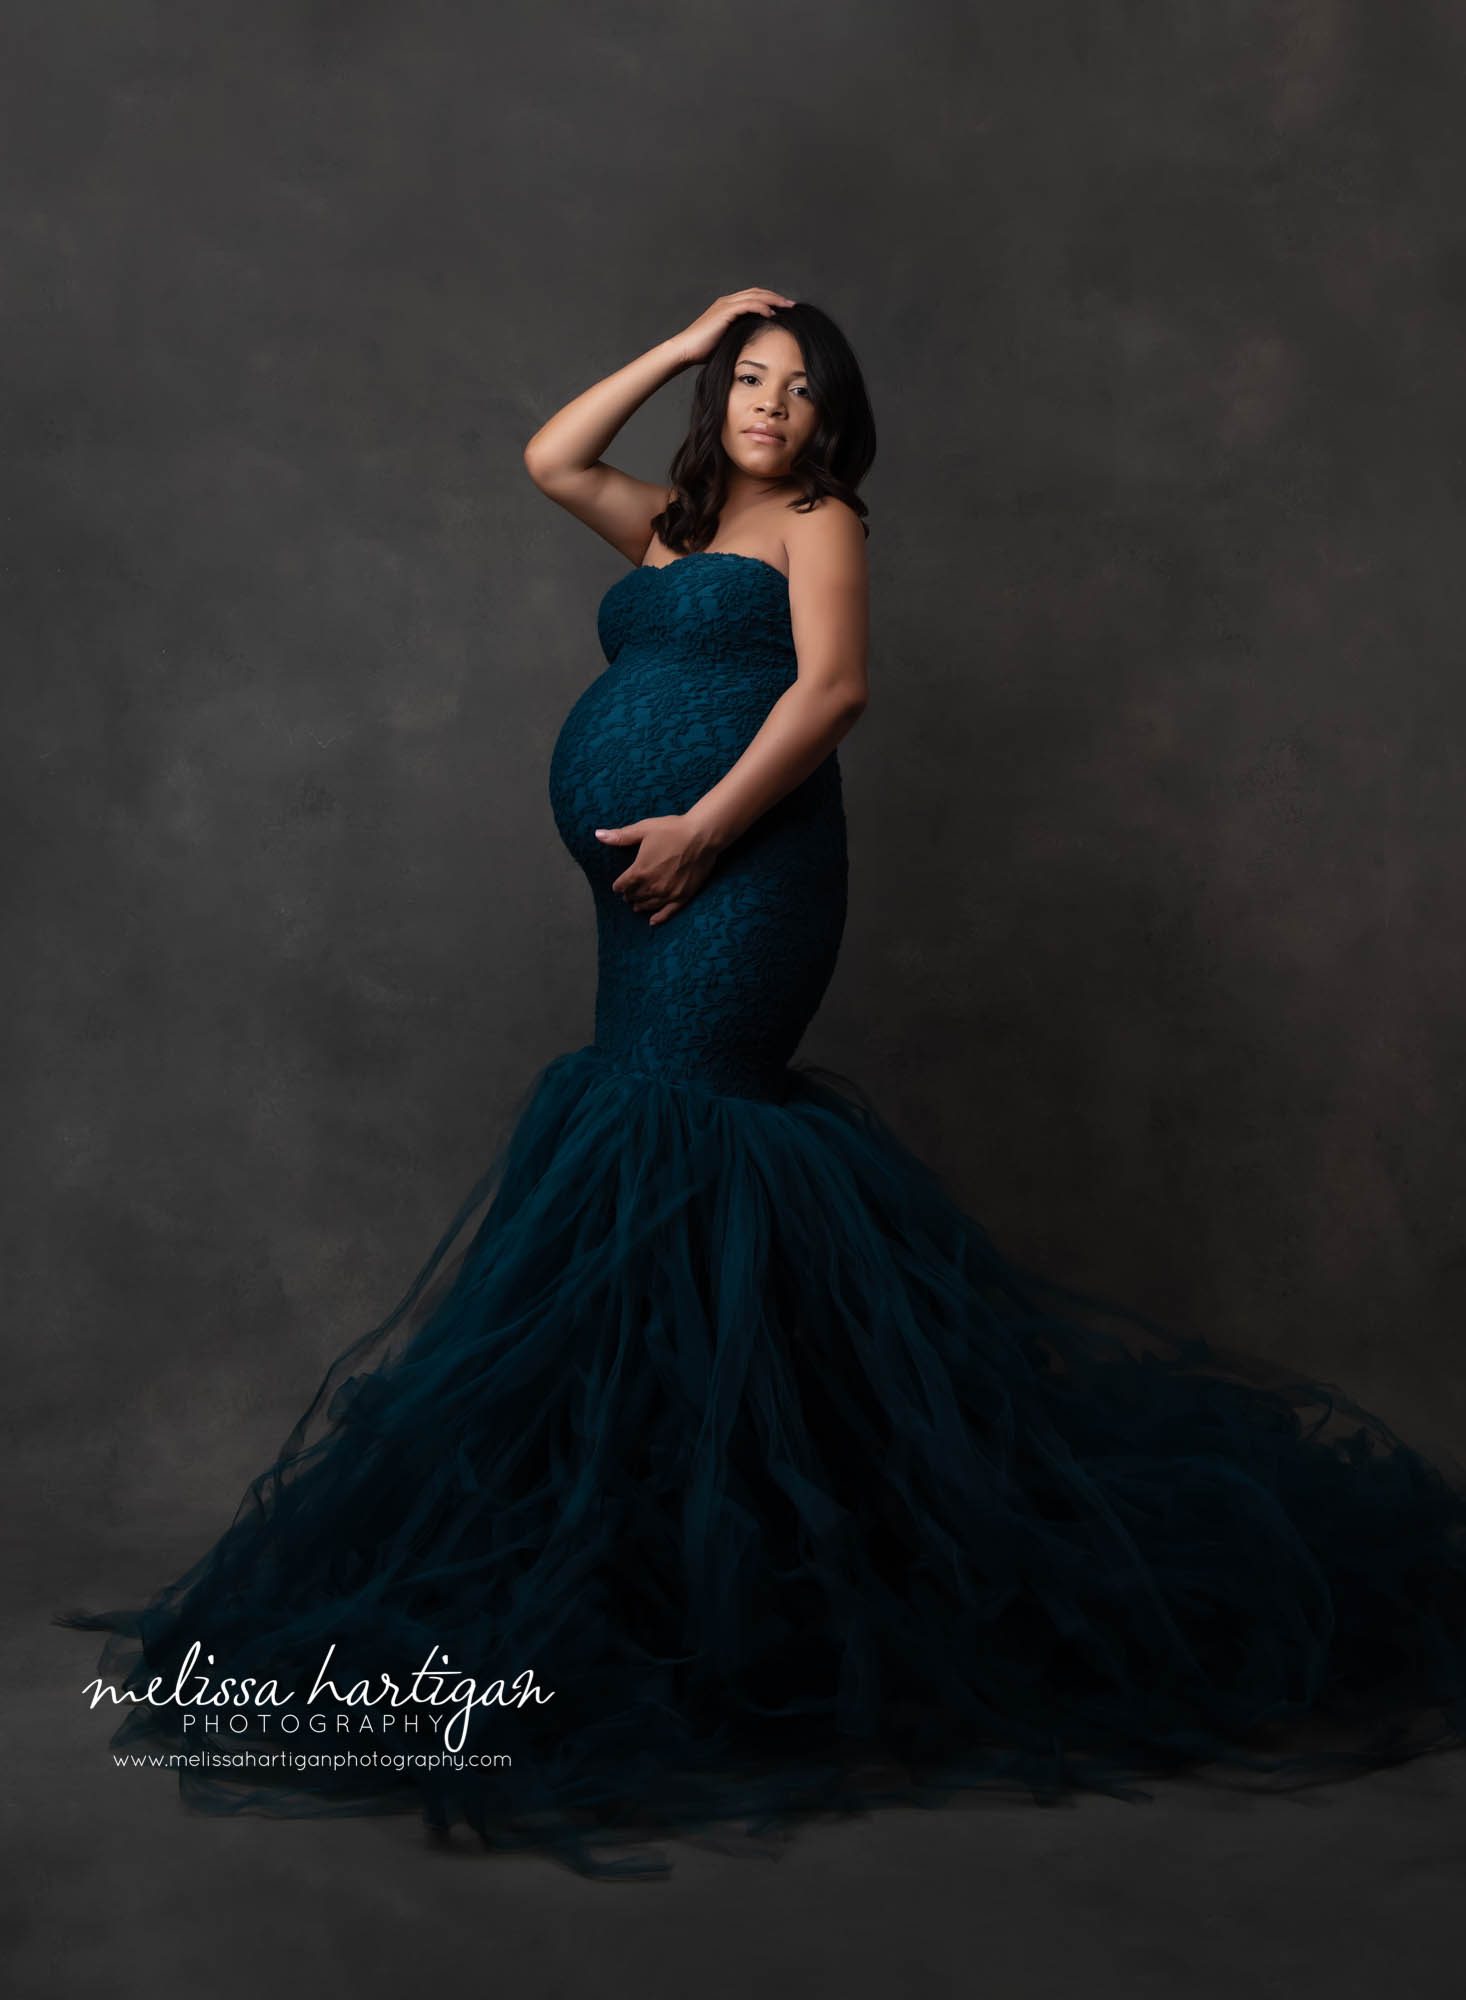 Studio maternity session expectant mother wearing teal colored form fitting mermaid style maternity dress with lace